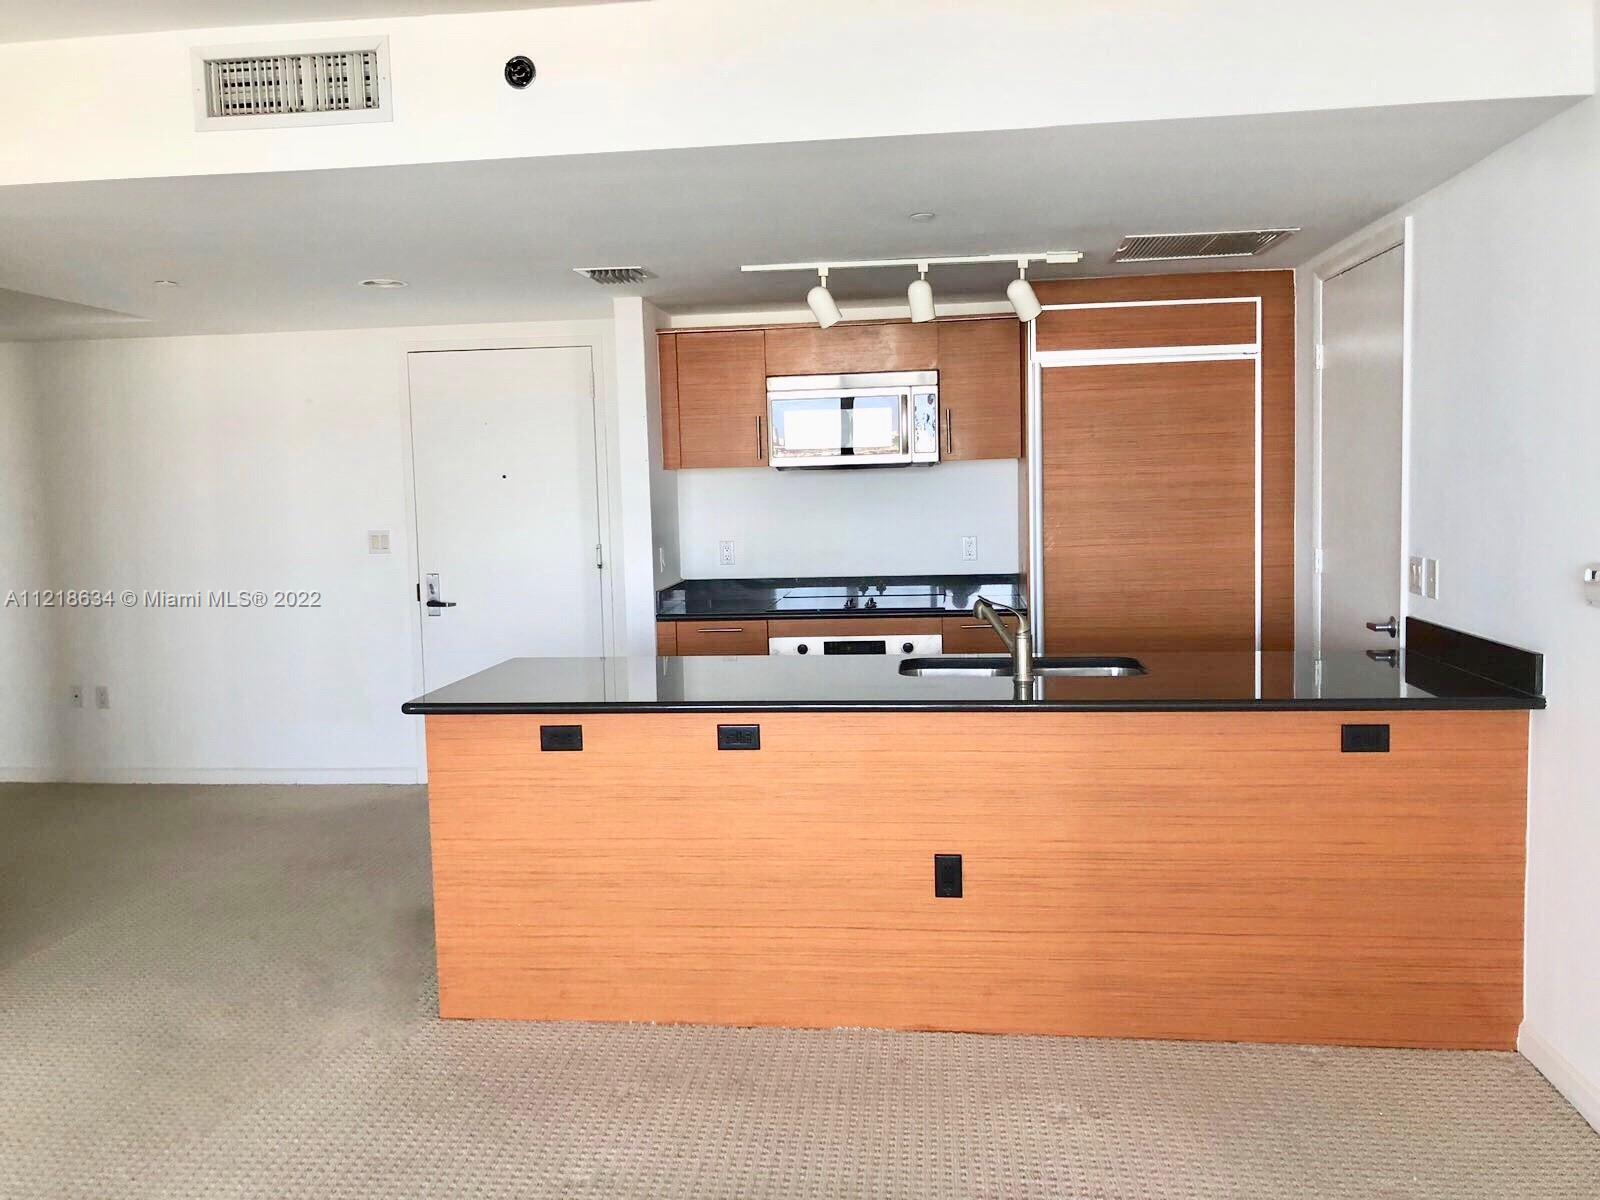 Beautiful unit 2+Den with Water Views, SS, Carpet, near Shopping Centers, Bayside, South Beach, Brickell Area, I-95. Must See!!!